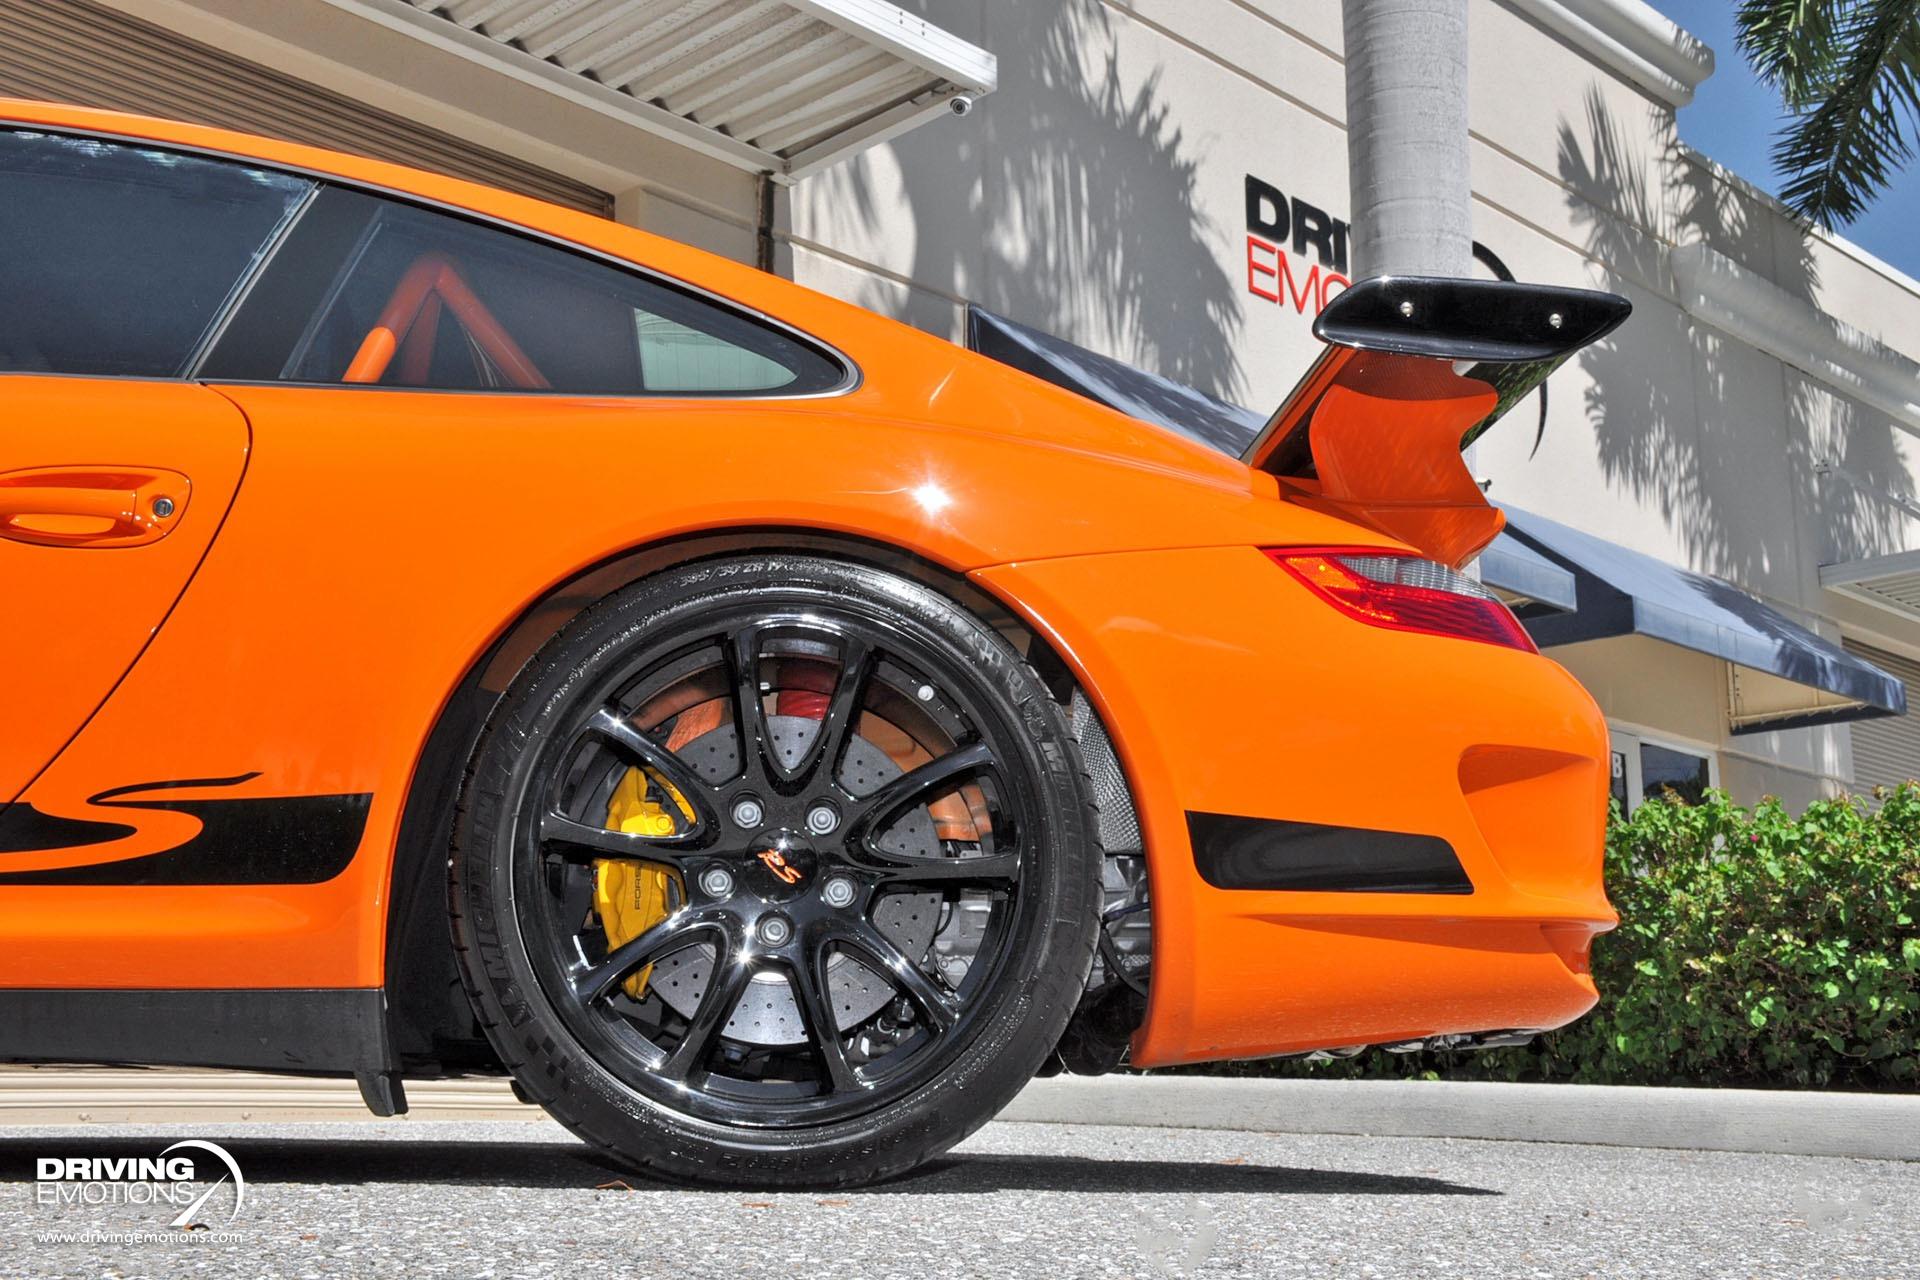 Used 2007 Porsche 911 GT3 RS GT3RS CERAMIC BRAKES! COLLECTOR! RARE!! | Lake Park, FL